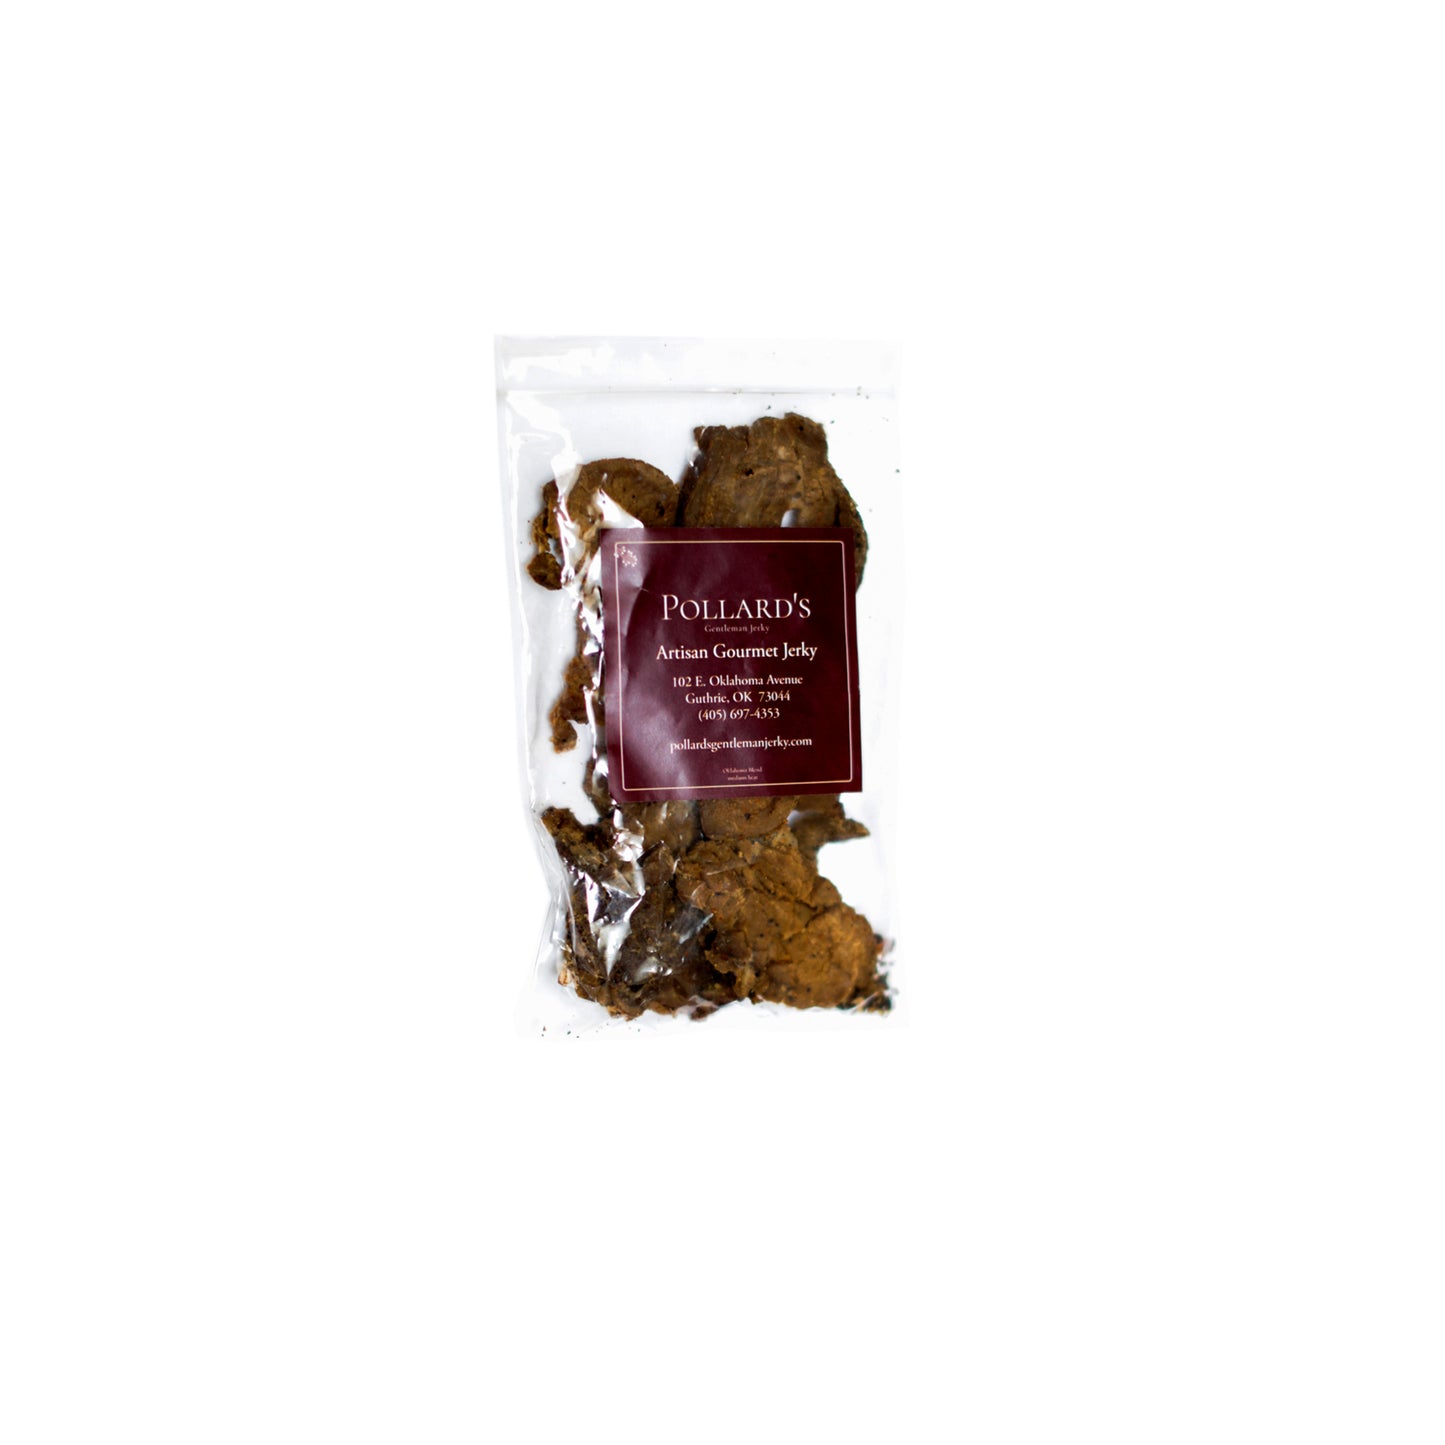 Oklahoma Blend Jerky in Re-Sealable Bag